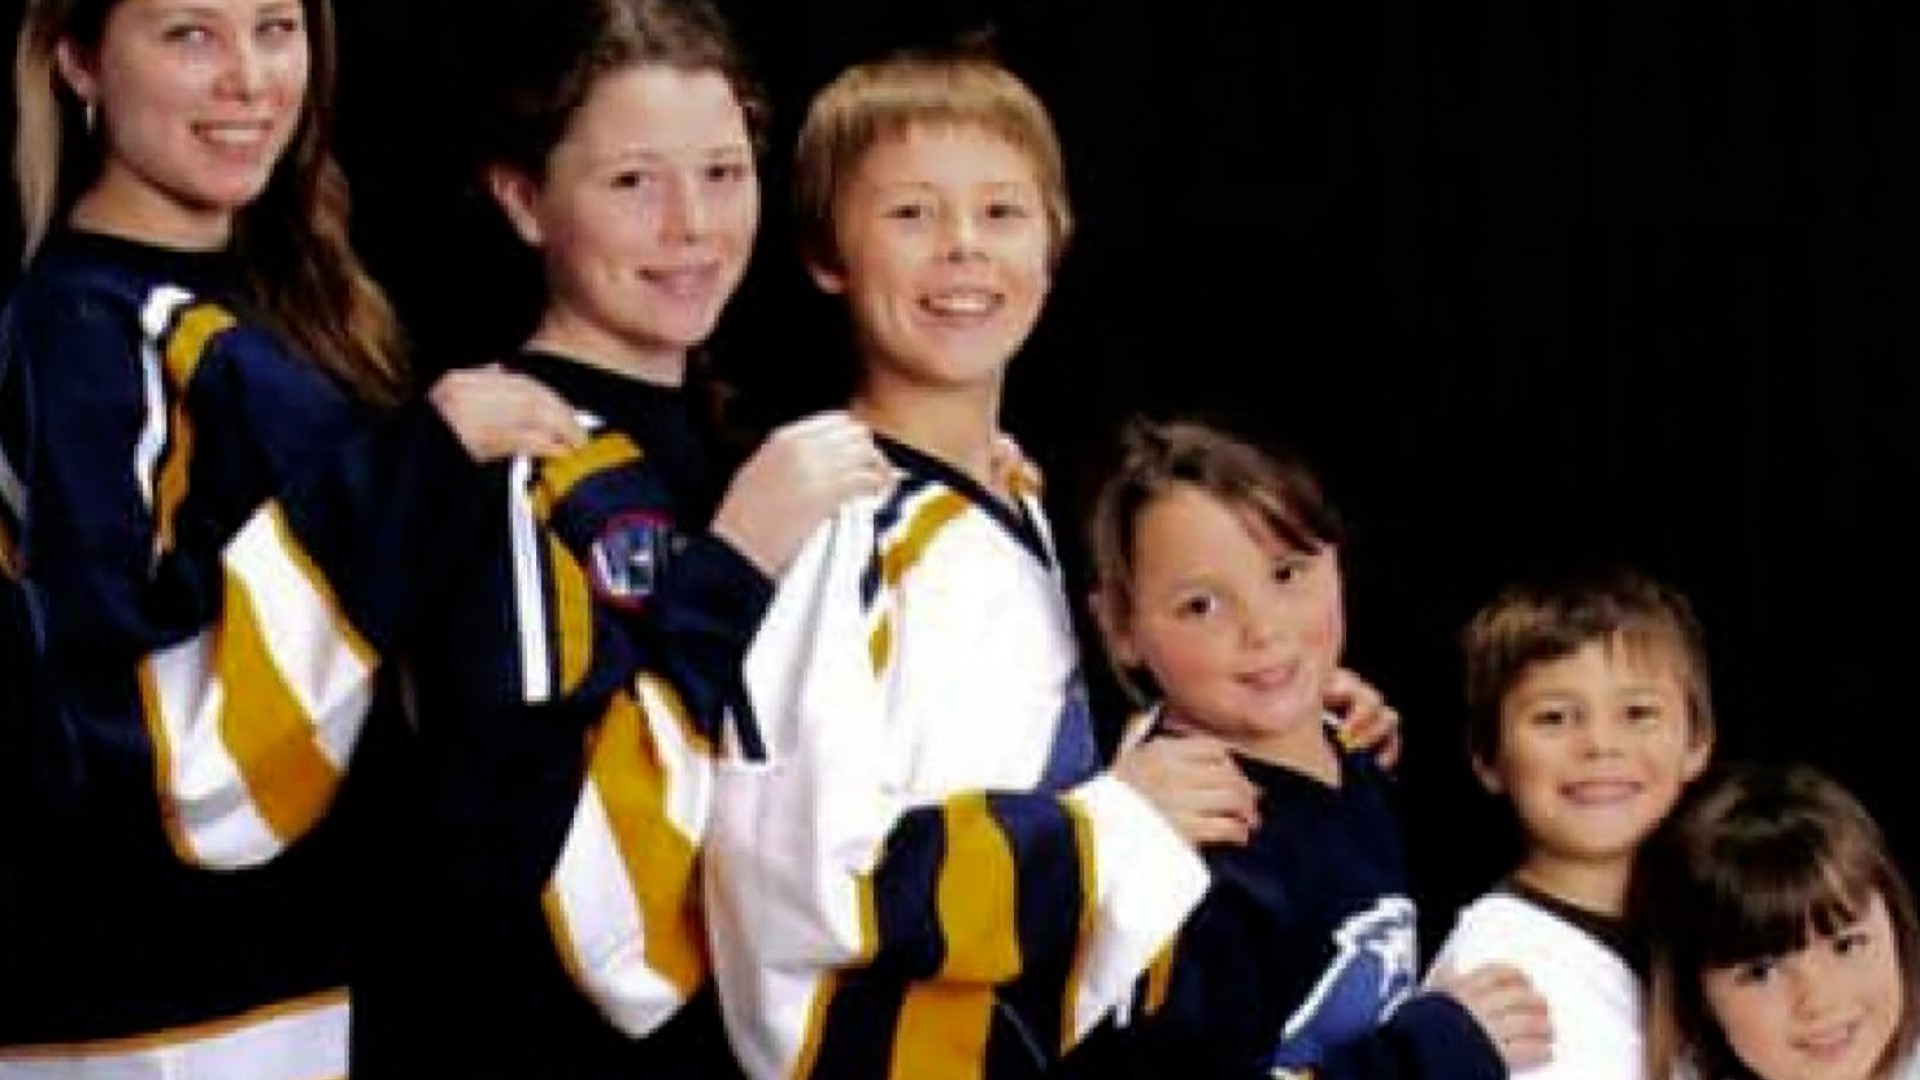 The Dunne's are building a hockey legacy in St. Louis.